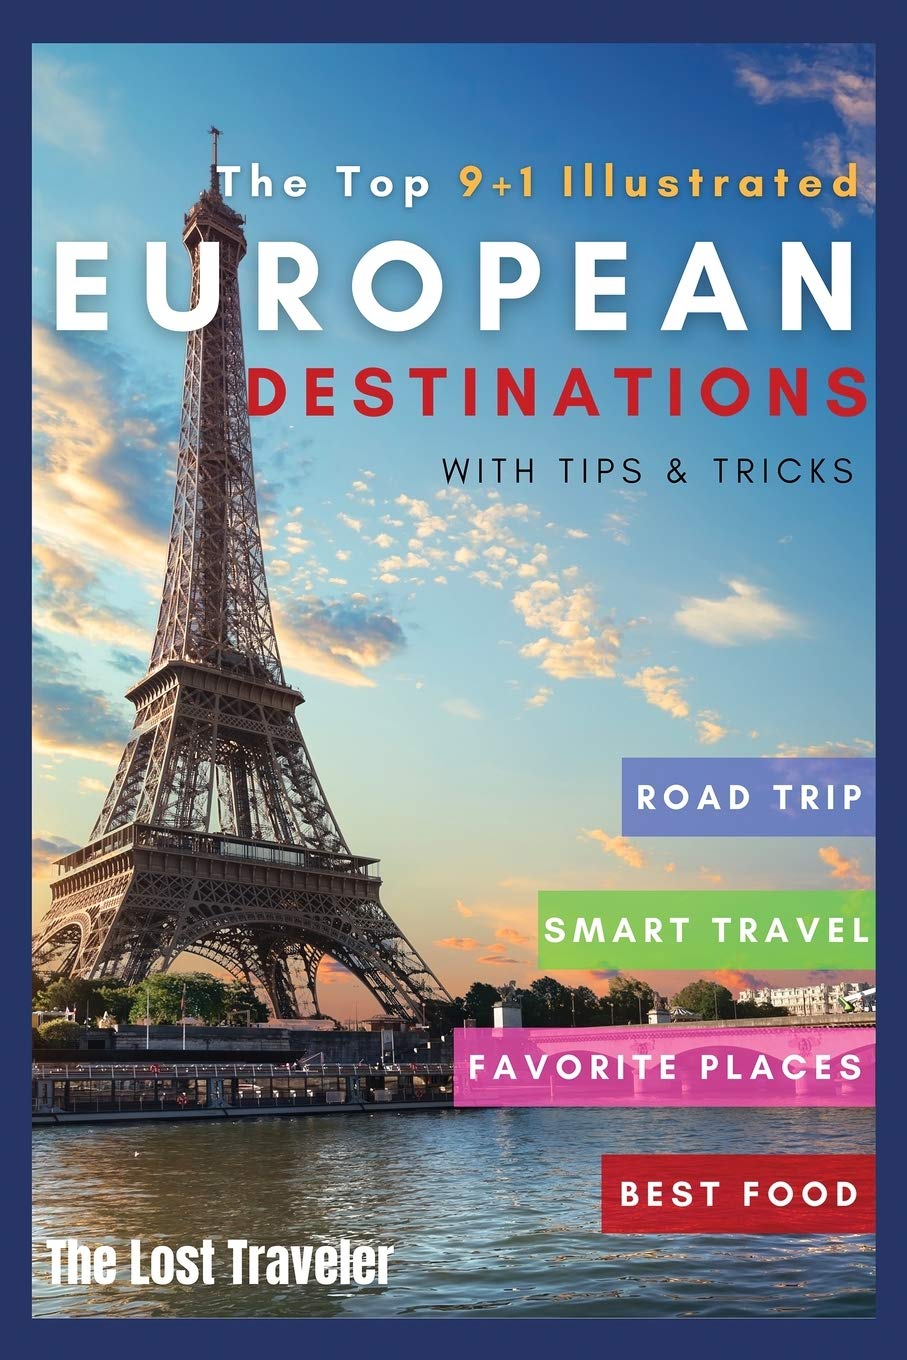 The Top 9+1 Illustrated European Destinations [with Tips&Tricks]: Everything You Need to Know in 2021 to Travel Europe on a Budget